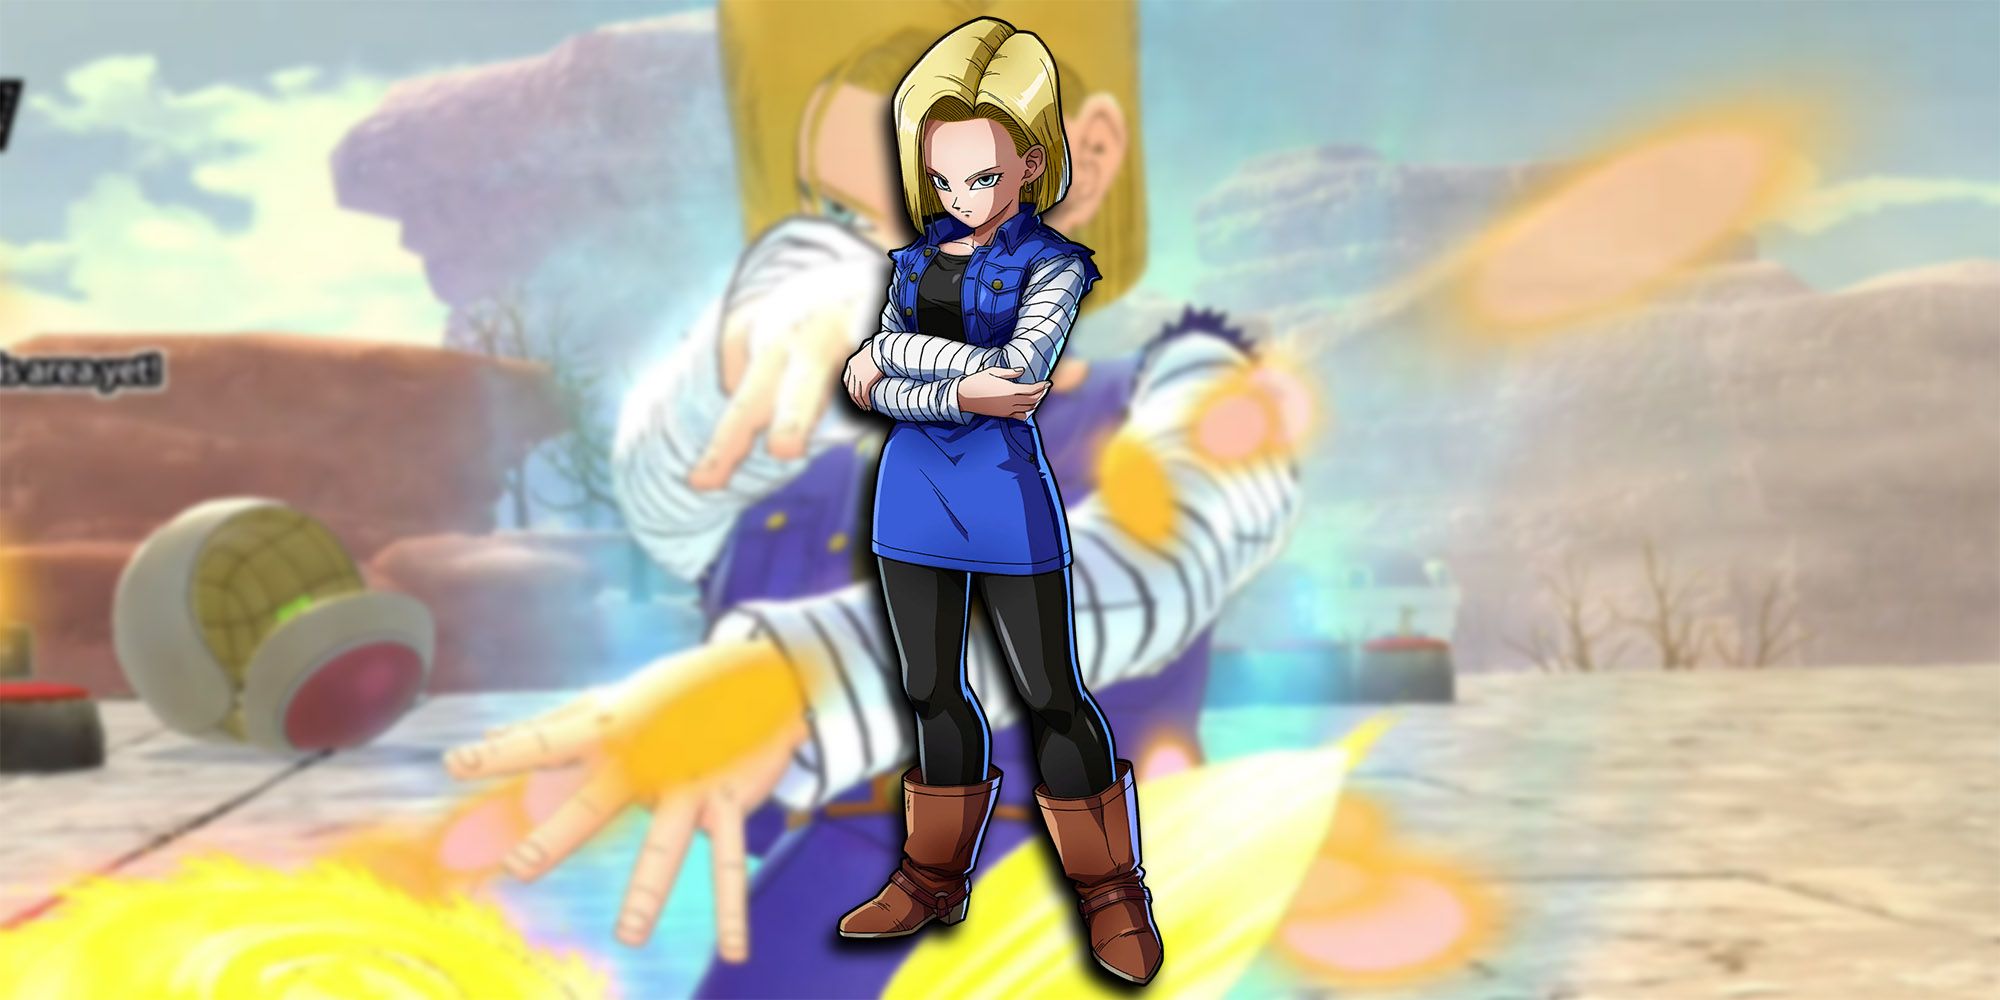 Dragon Ball The Breakers - Android 18 Using Super Attack In-Game With PNG OF 18 Overlaid On Top